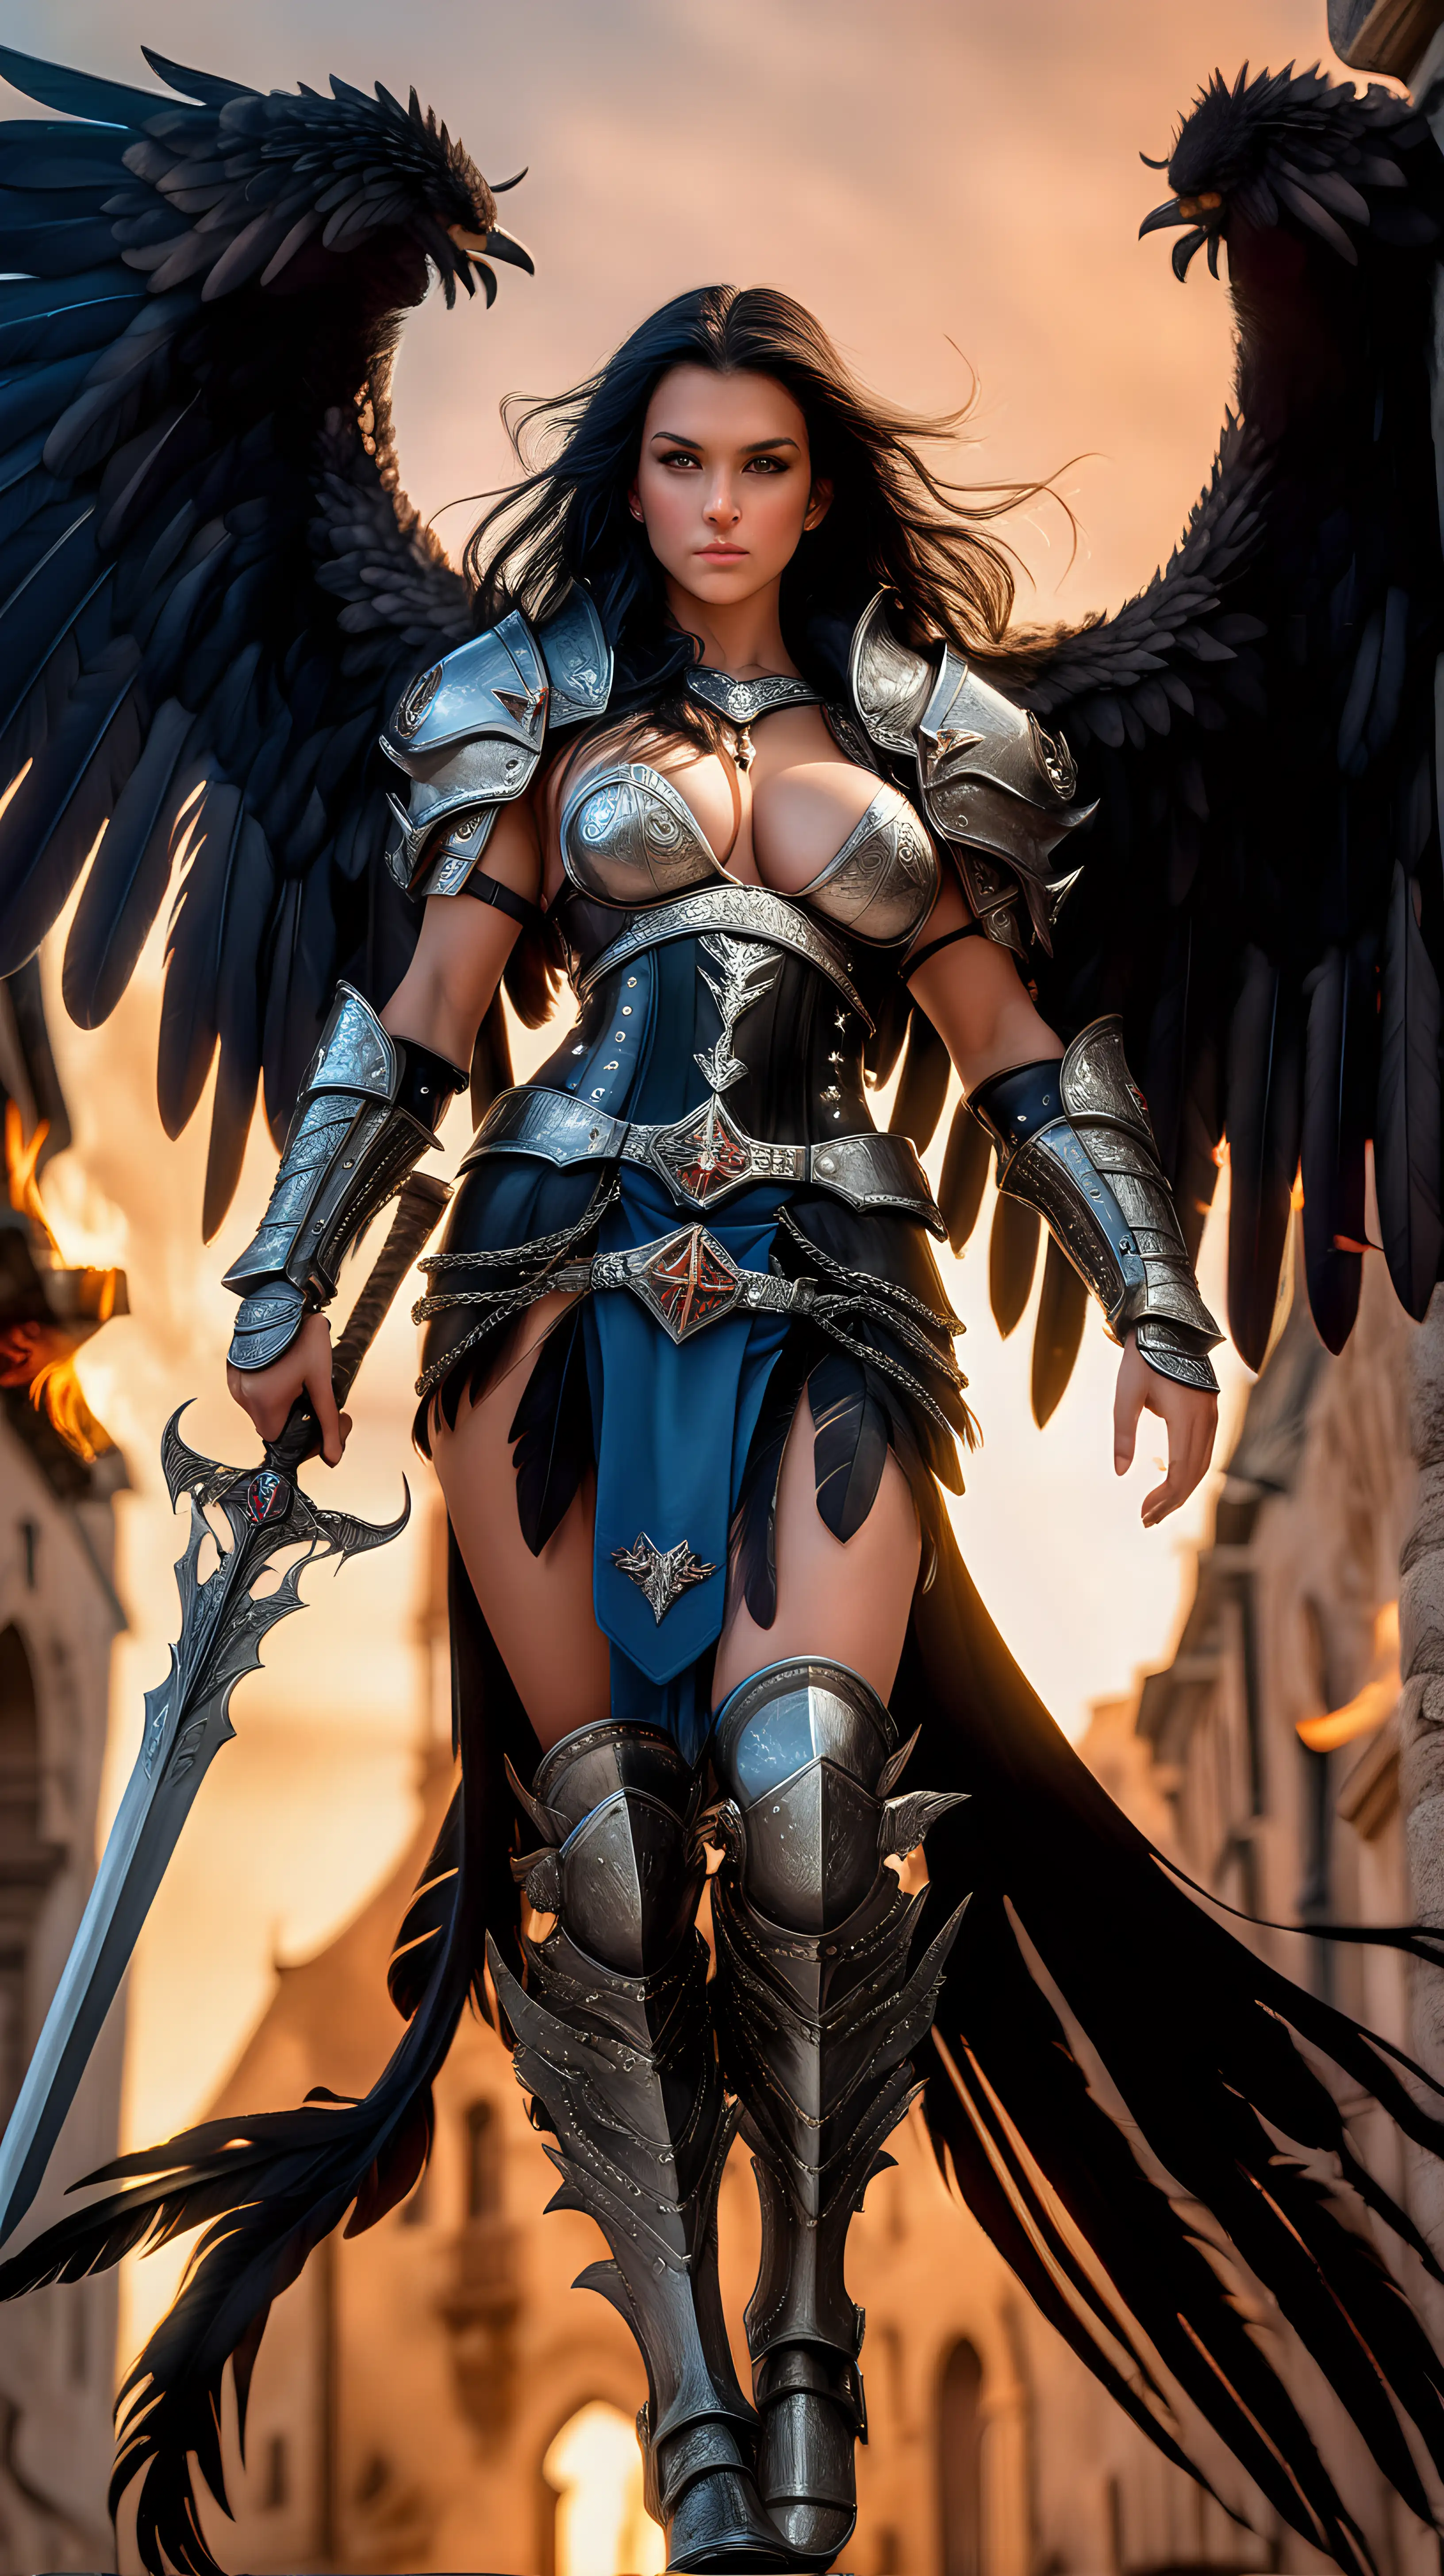 Cinematic Fallen Angel Paladin Walking Amidst Medieval City Flames